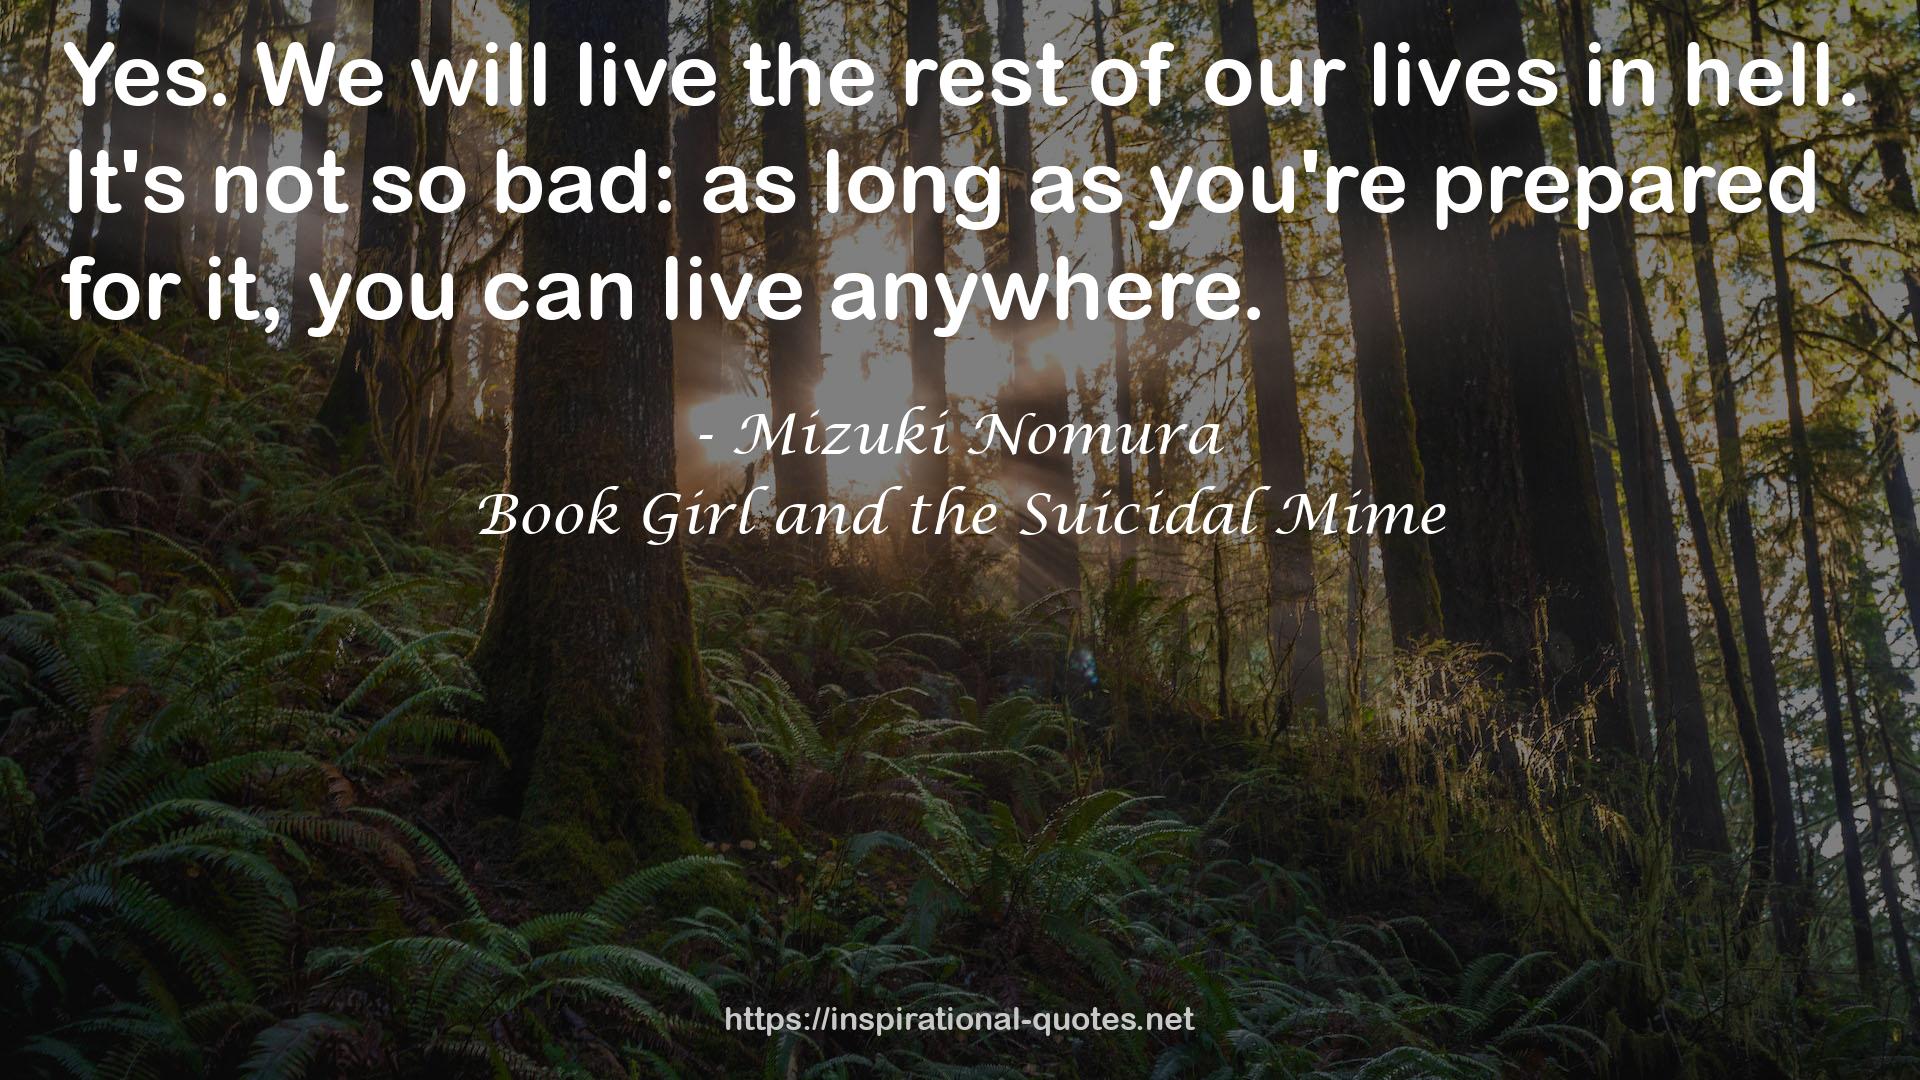 Book Girl and the Suicidal Mime QUOTES